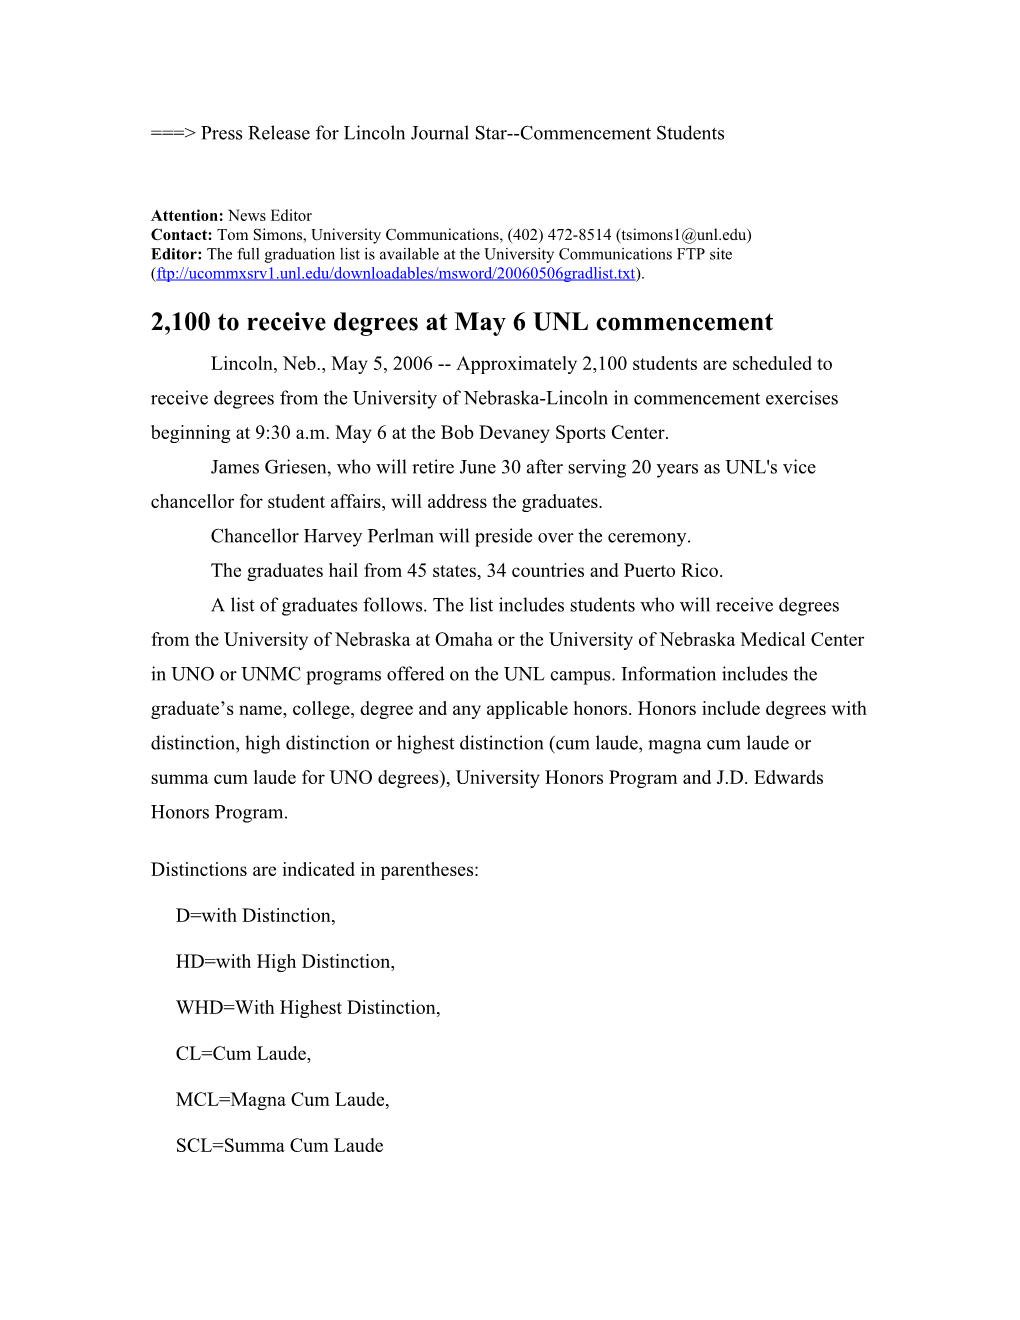 Press Release for Lincoln Journal Star Commencement Students